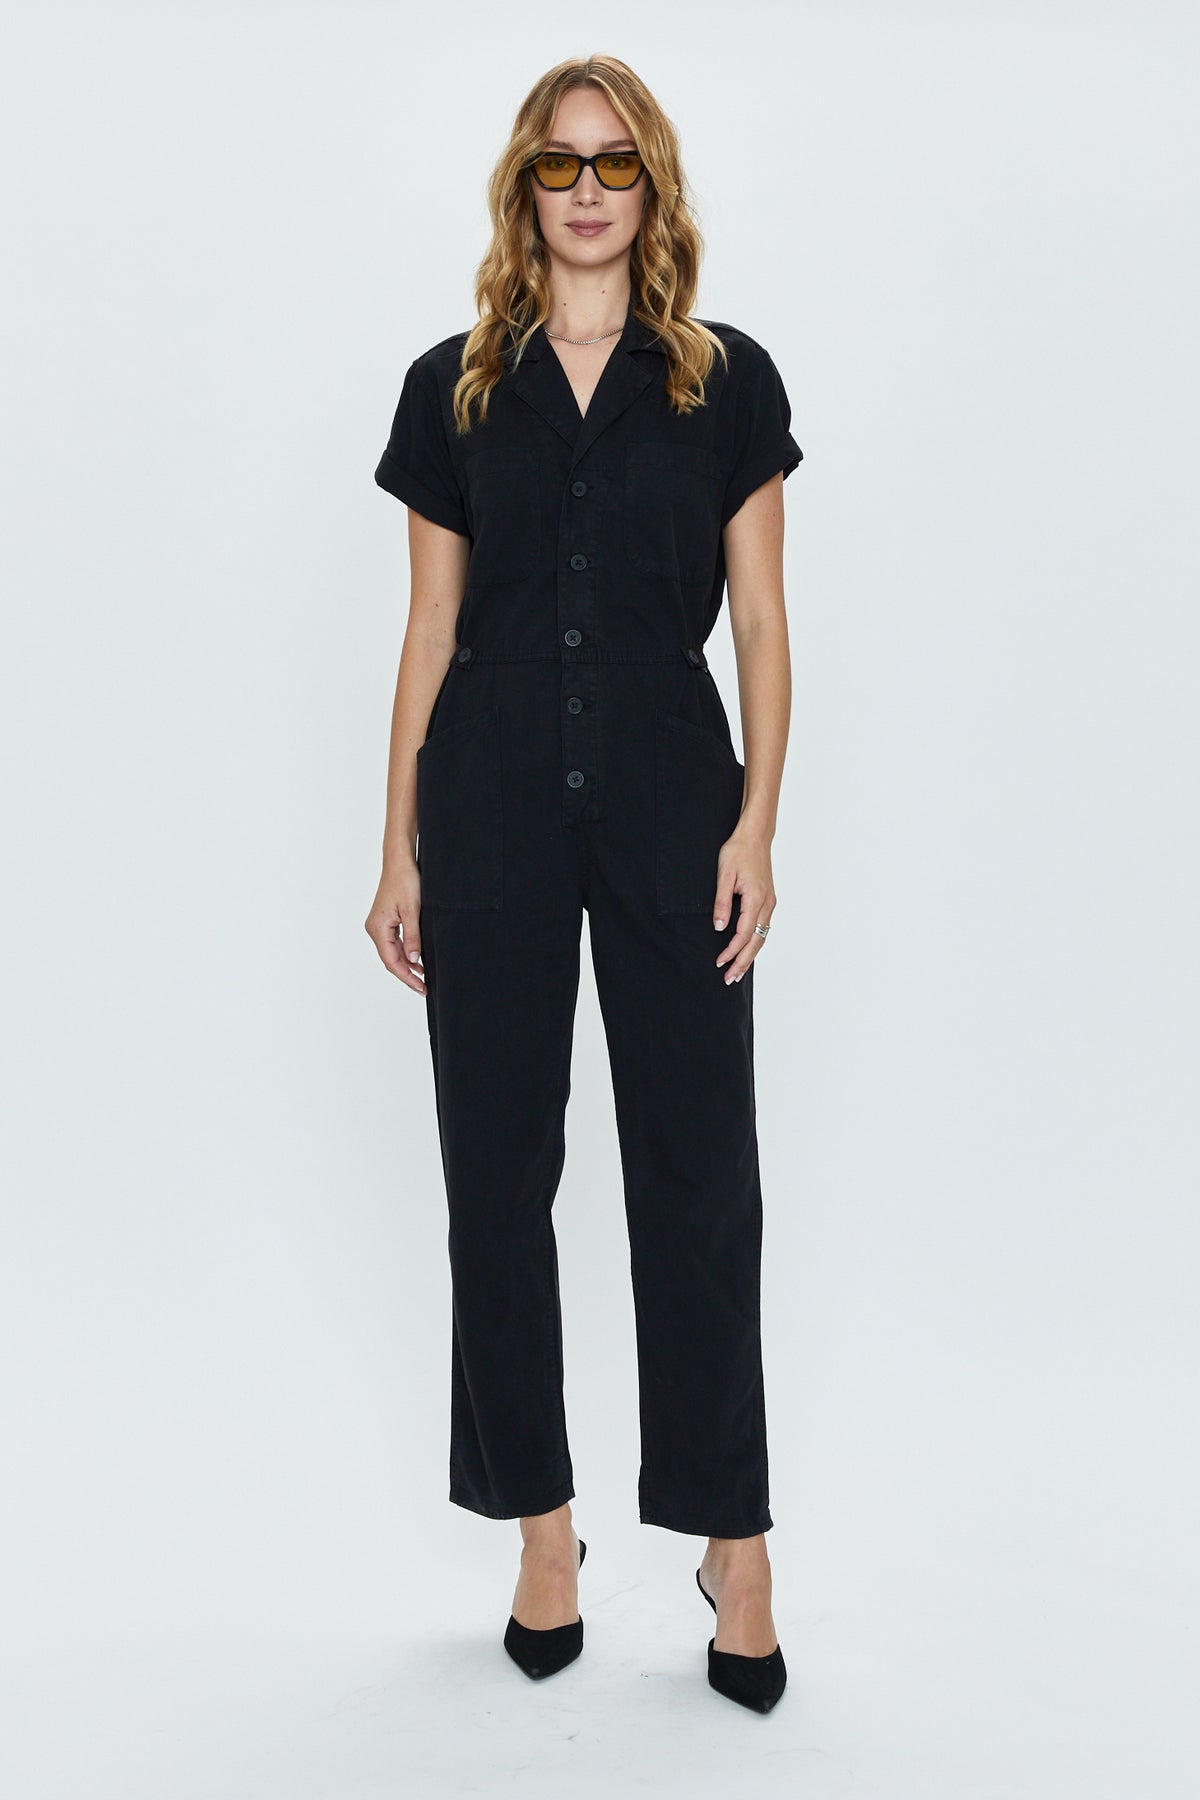 Grover Short Sleeve Field Suit - Fade To Black
            
              Sale